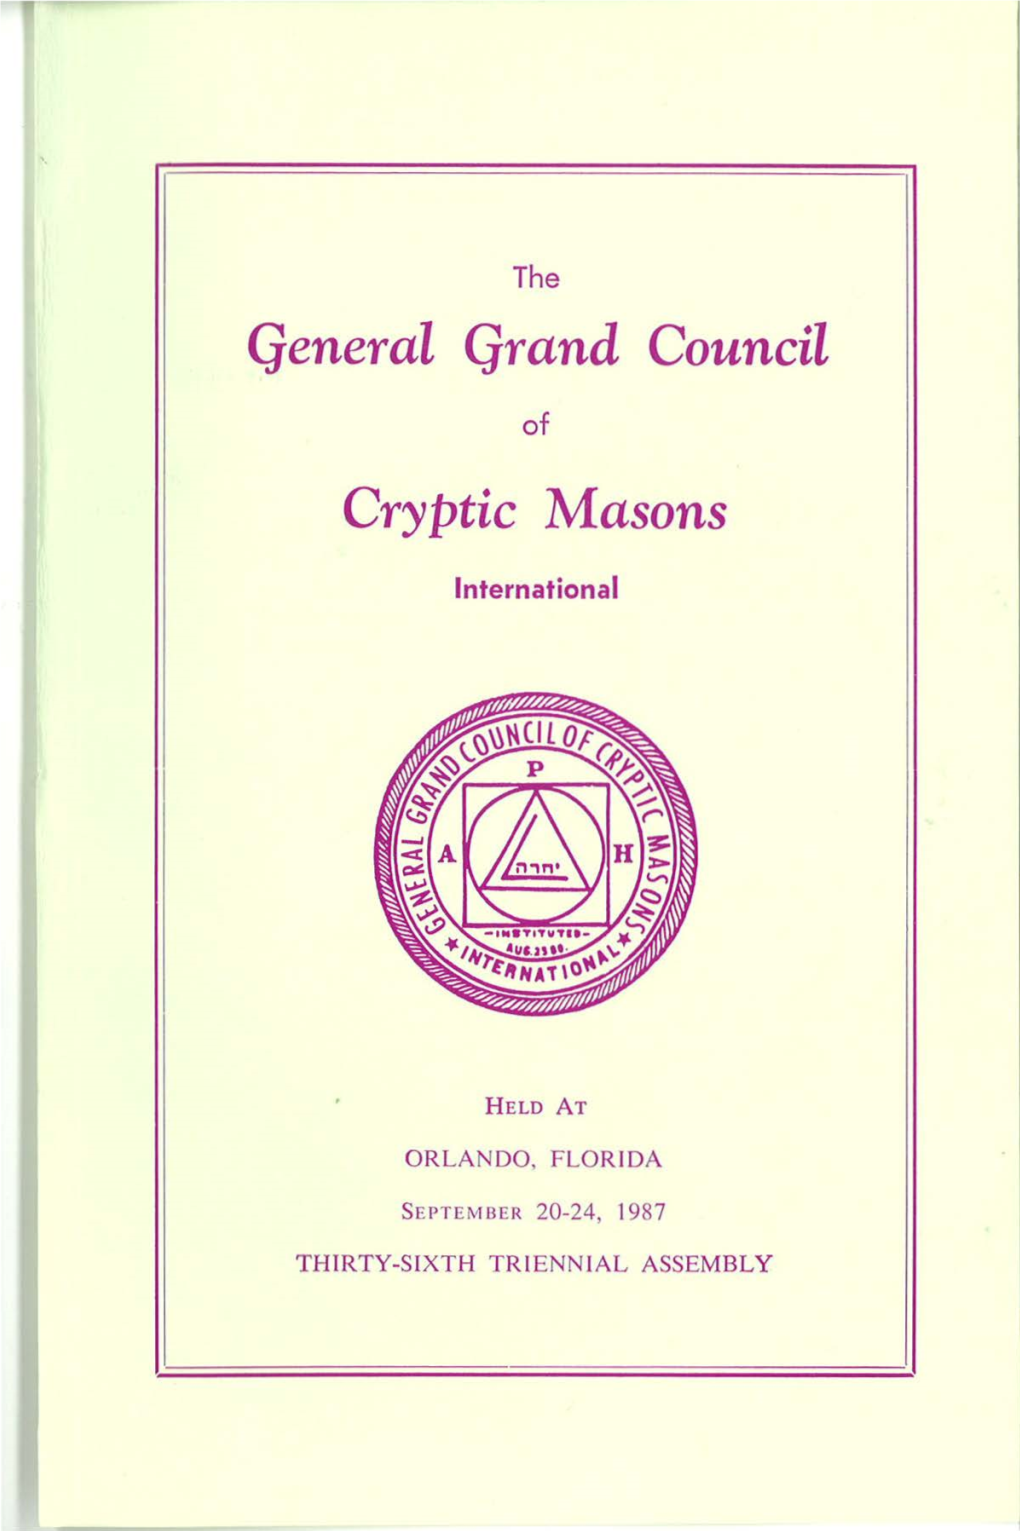 General Grand Council Cryptic Masons International As General Grand Steward in 1966-69, and As Regional Deputy in 1969-72